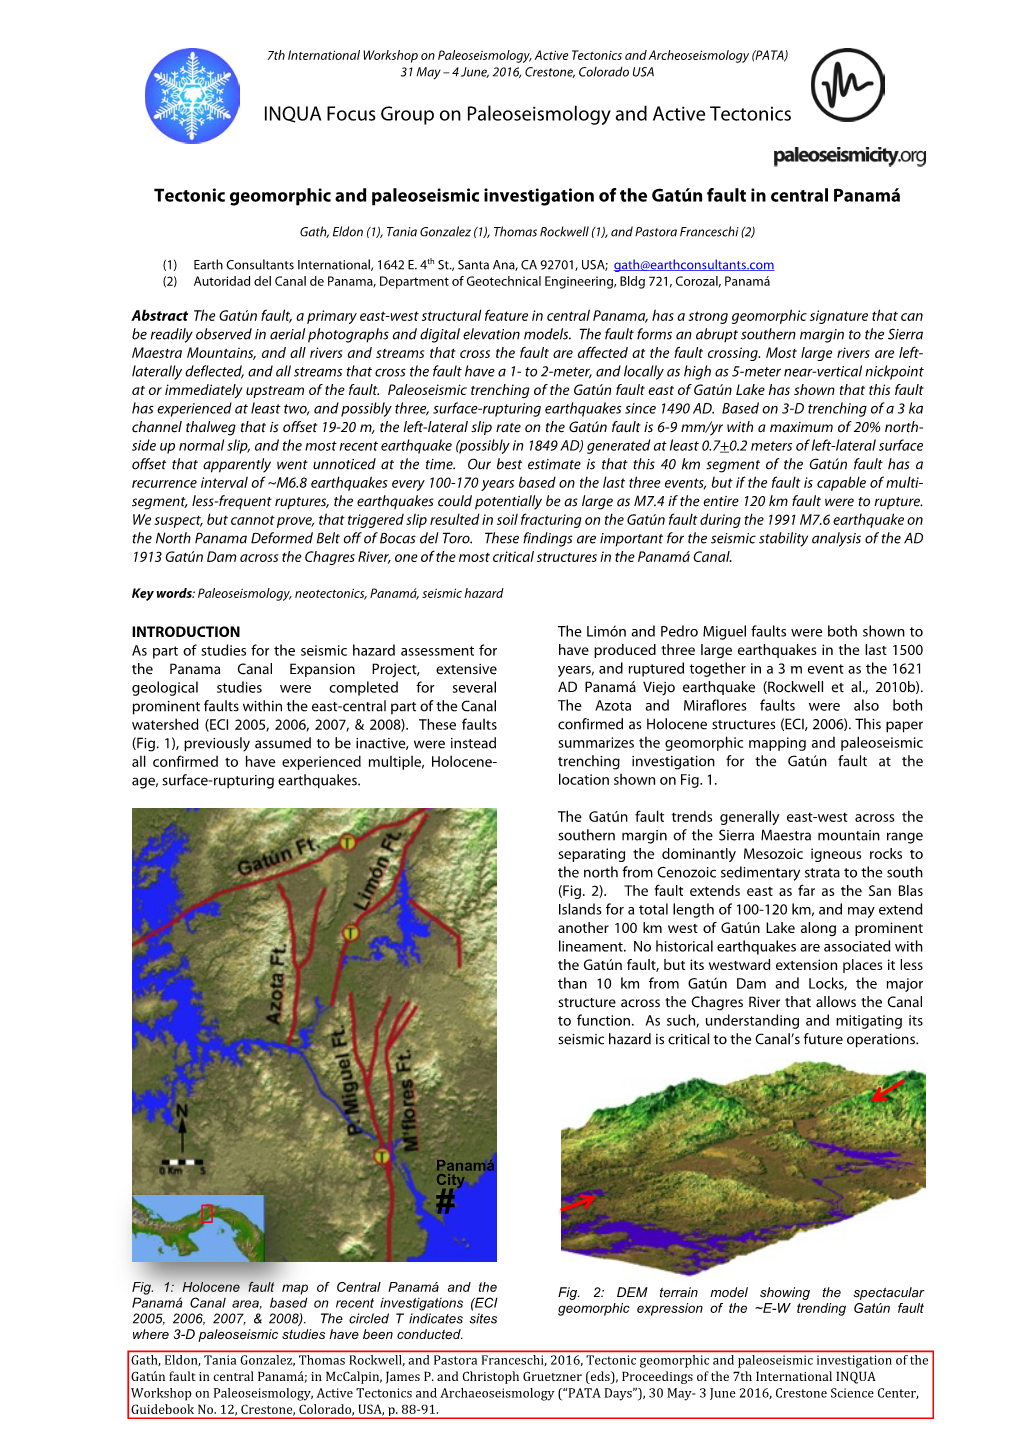 Tectonic Geomorphic and Paleoseismic Investigation of the Gatún Fault in Central Panamá